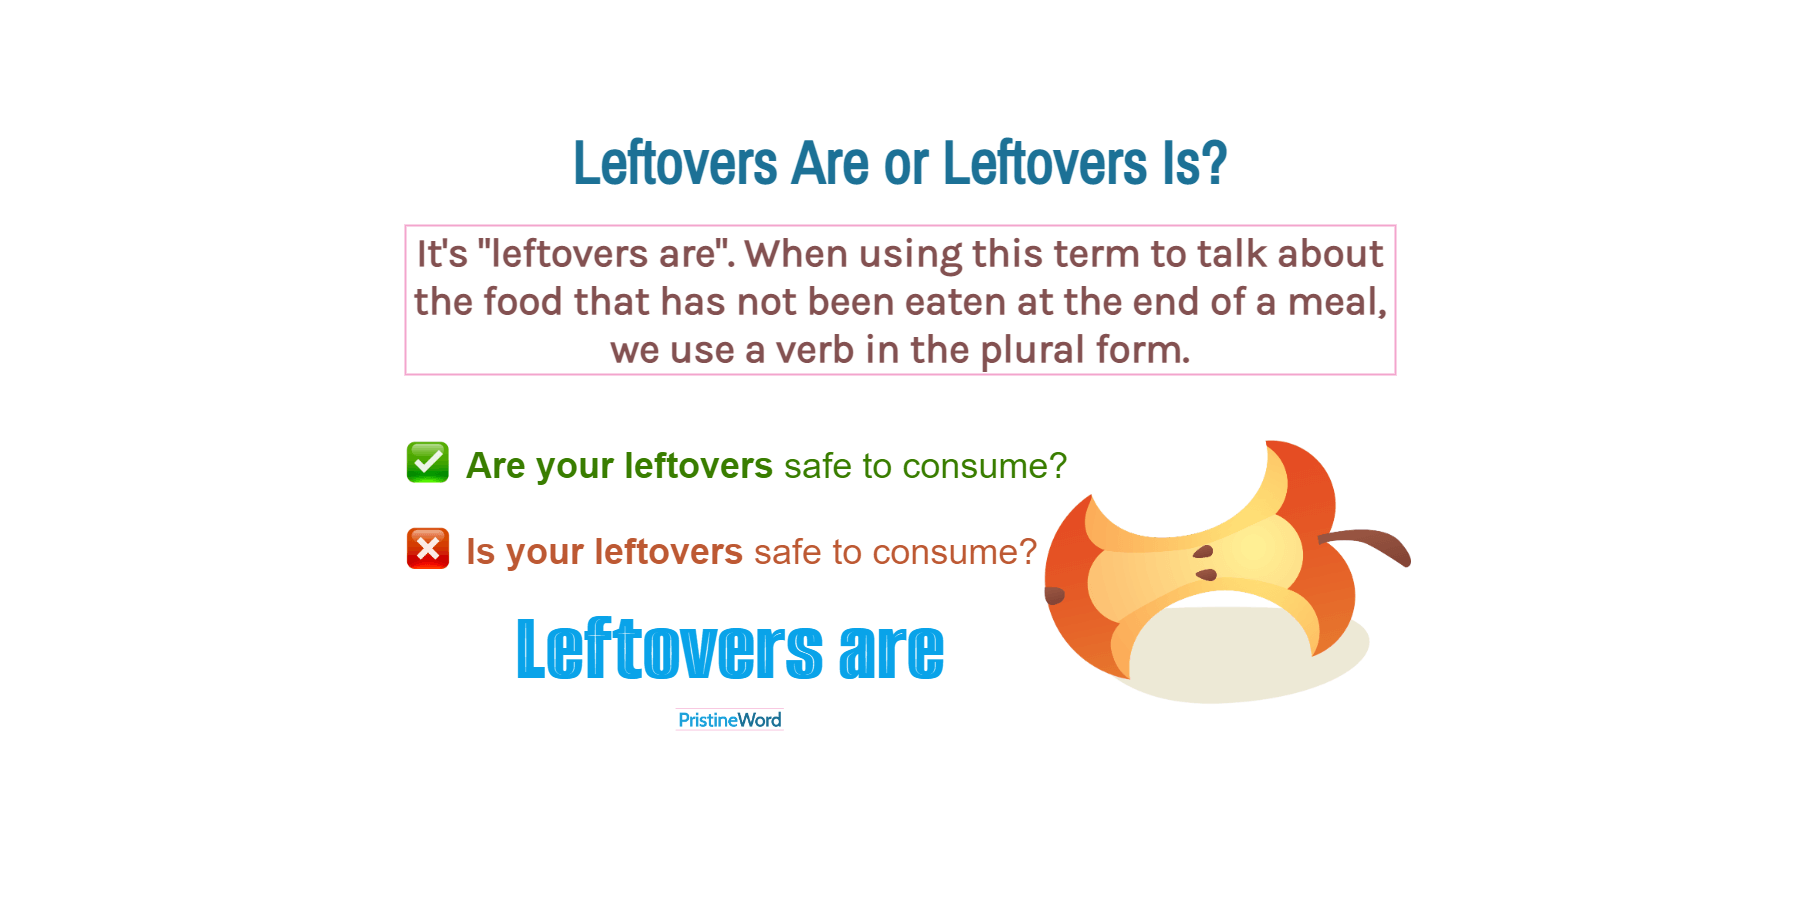 Leftovers Are Or Leftovers Is. Which Is Correct?